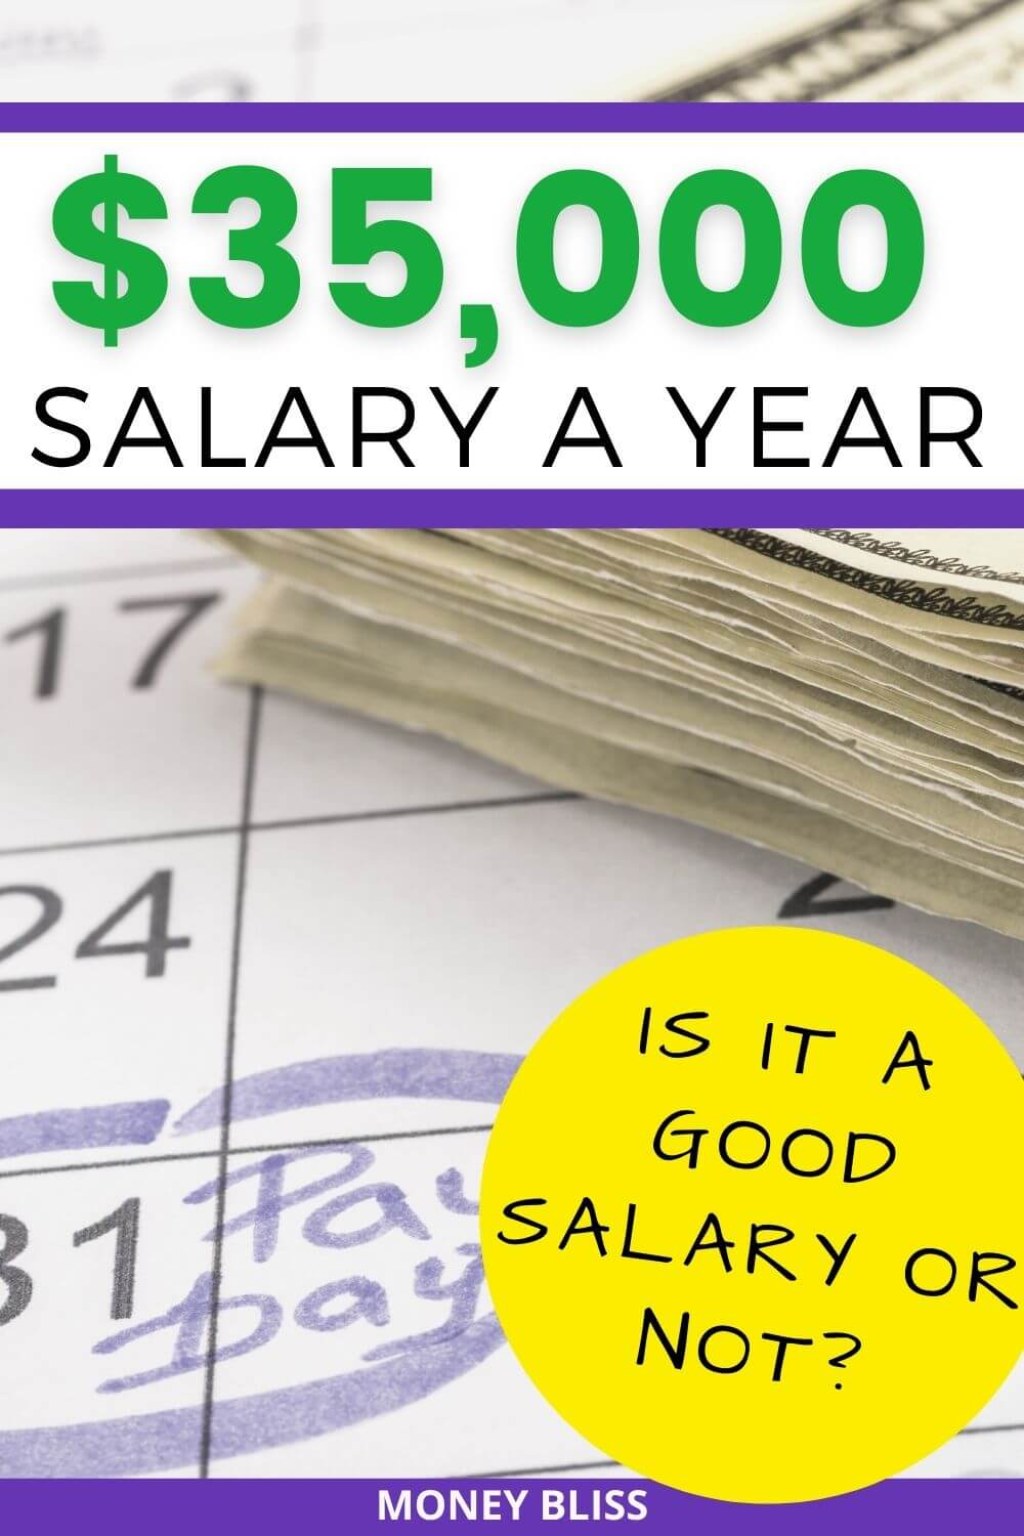 budgeting 35000 salary - $ a Year is How Much an Hour? Good Salary or No? - Money Bliss